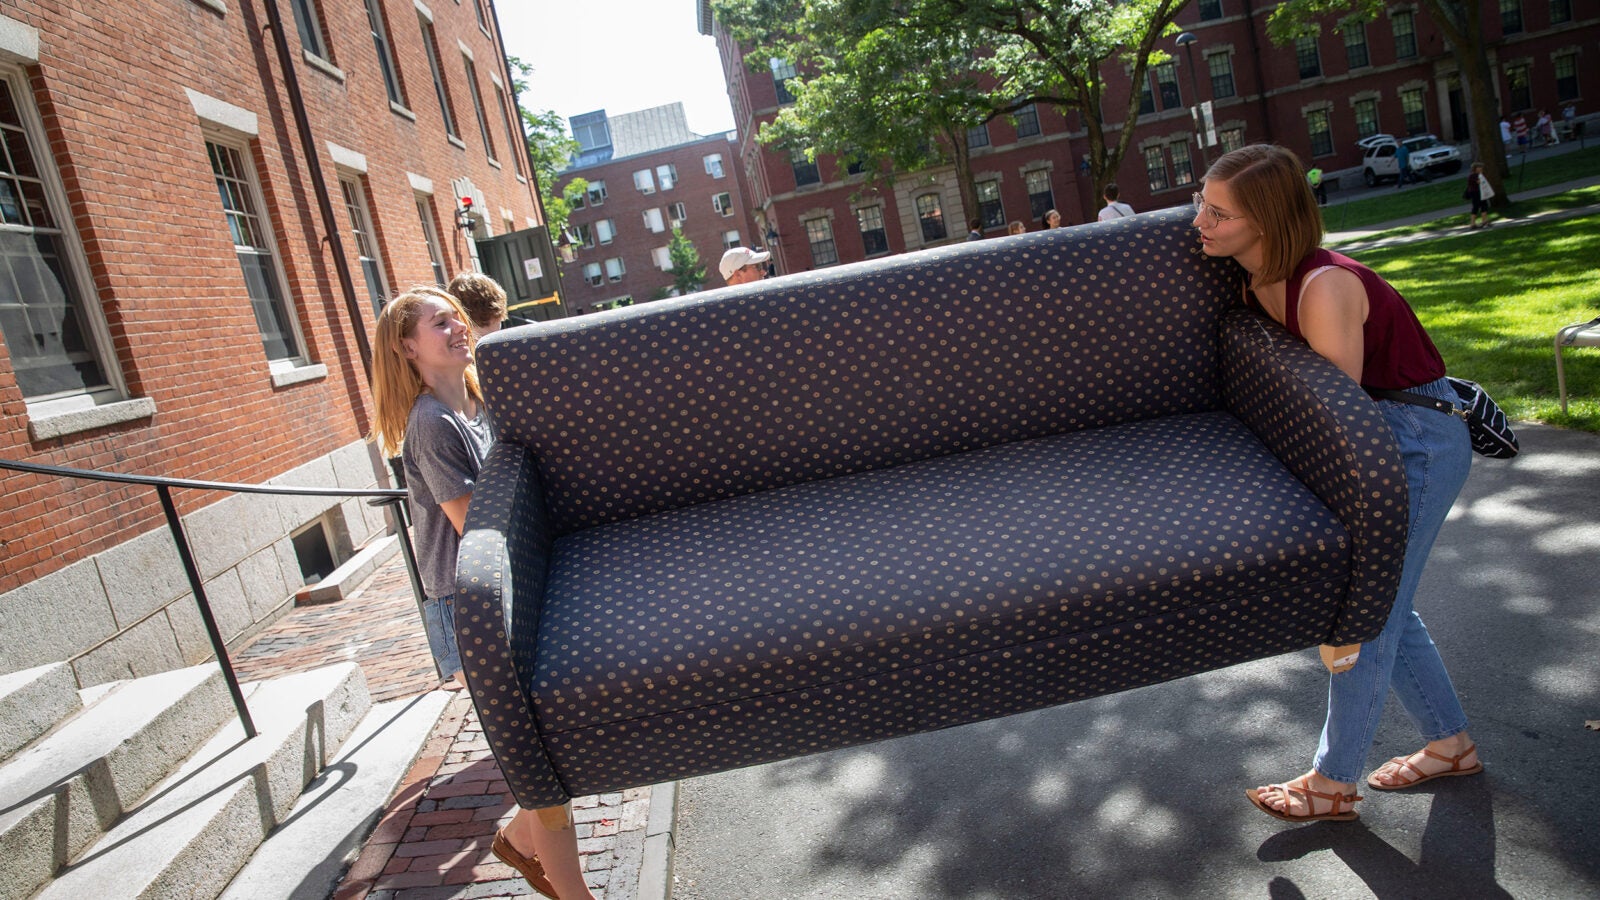 Students carrying a couch